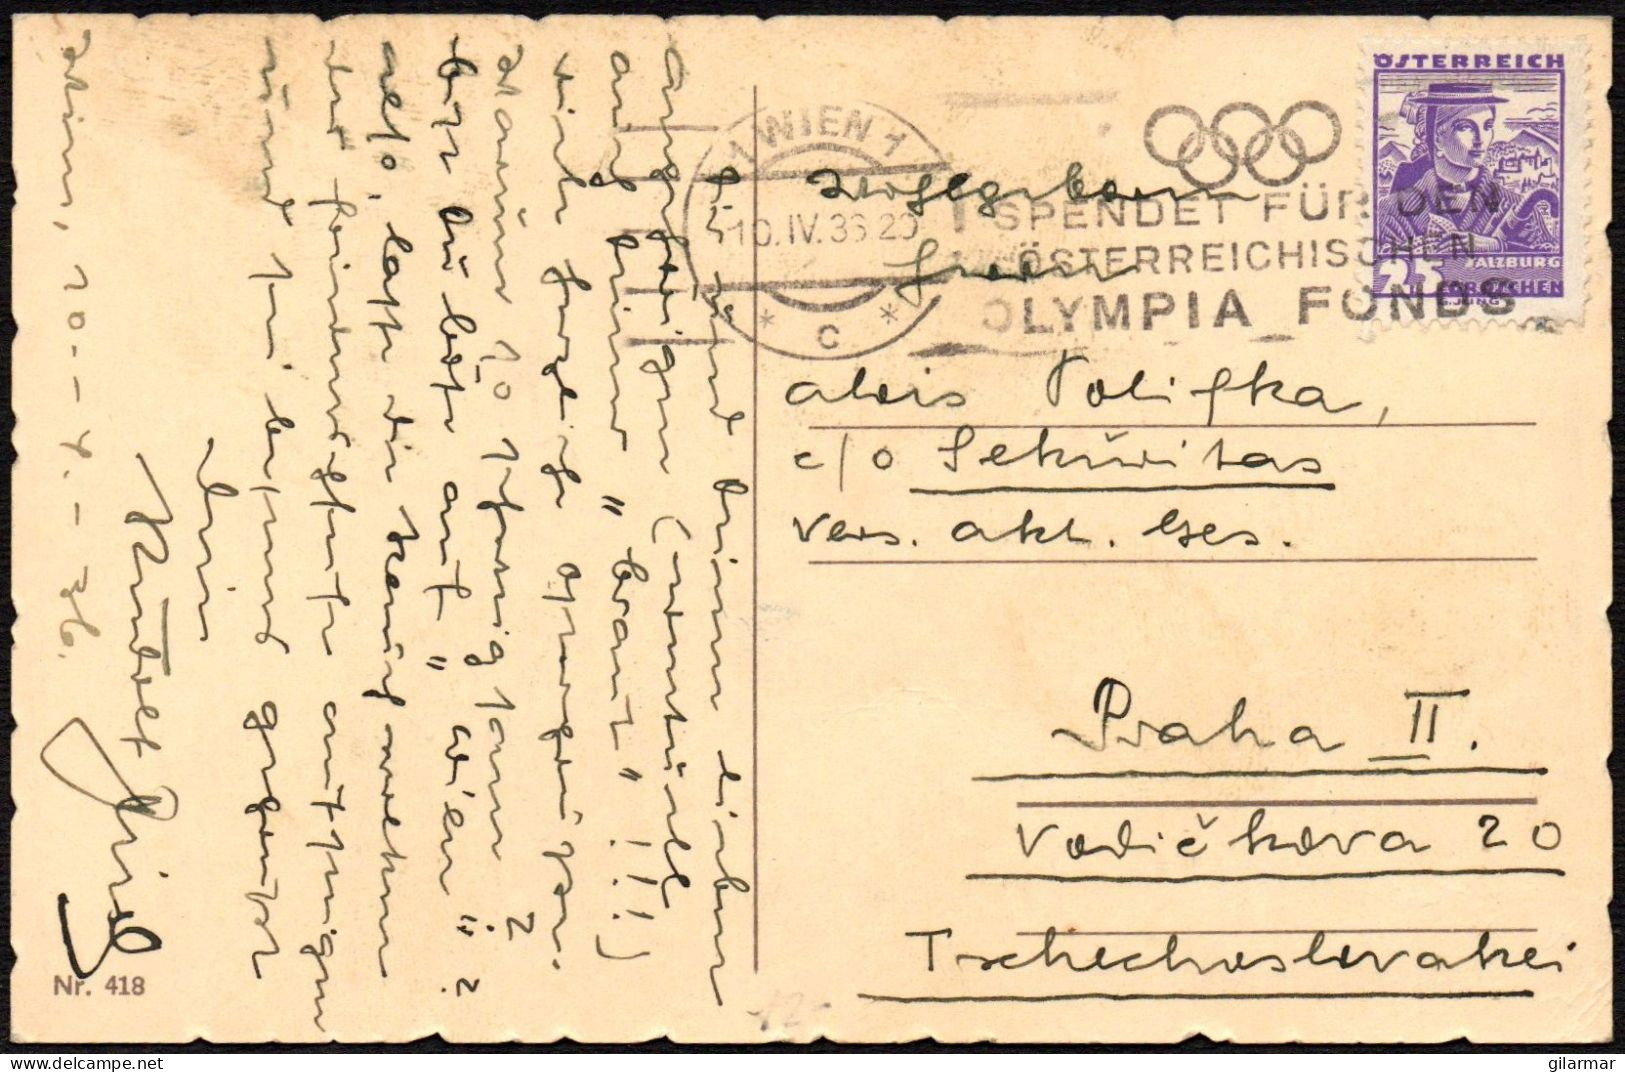 OLYMPIC GAMES 1936 - AUSTRIA WIEN 1 C 1935 - DONATE TO THE AUSTRIAN OLYMPIC FUND - MAILED POSTCARD - M - Ete 1936: Berlin